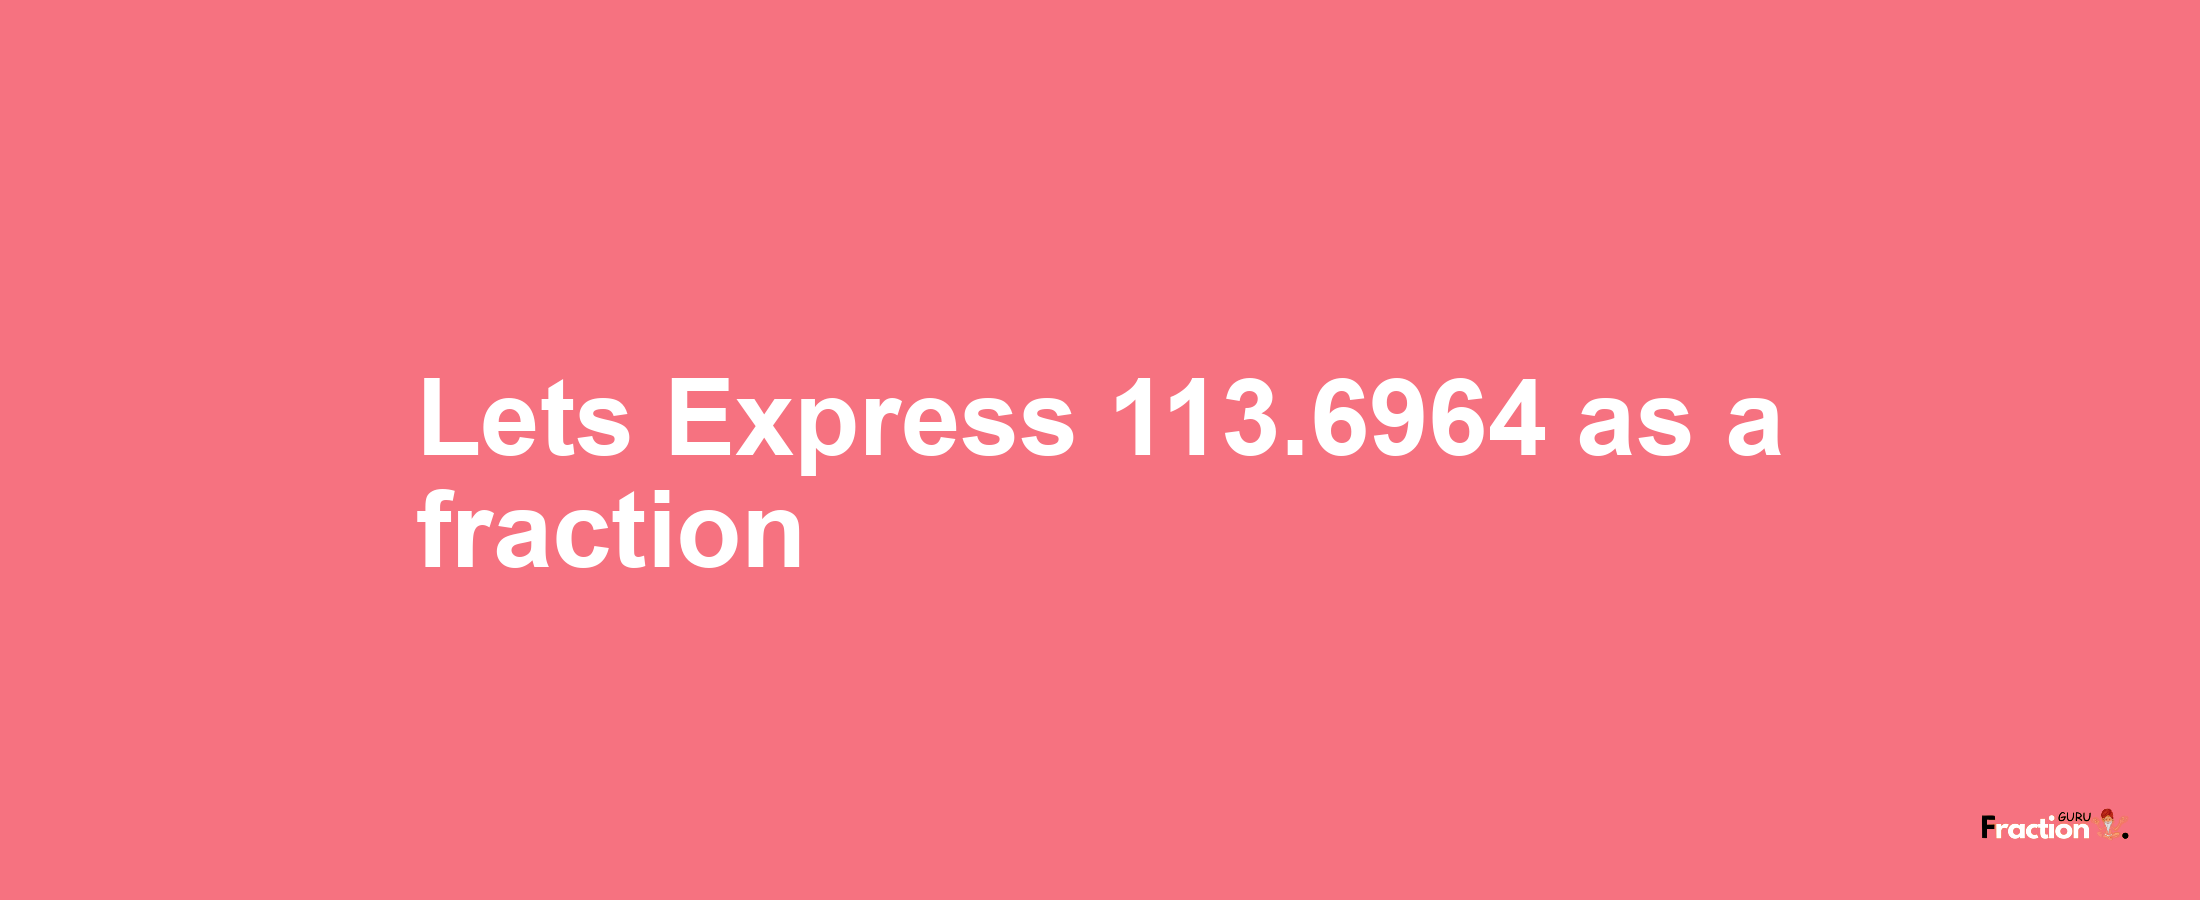 Lets Express 113.6964 as afraction